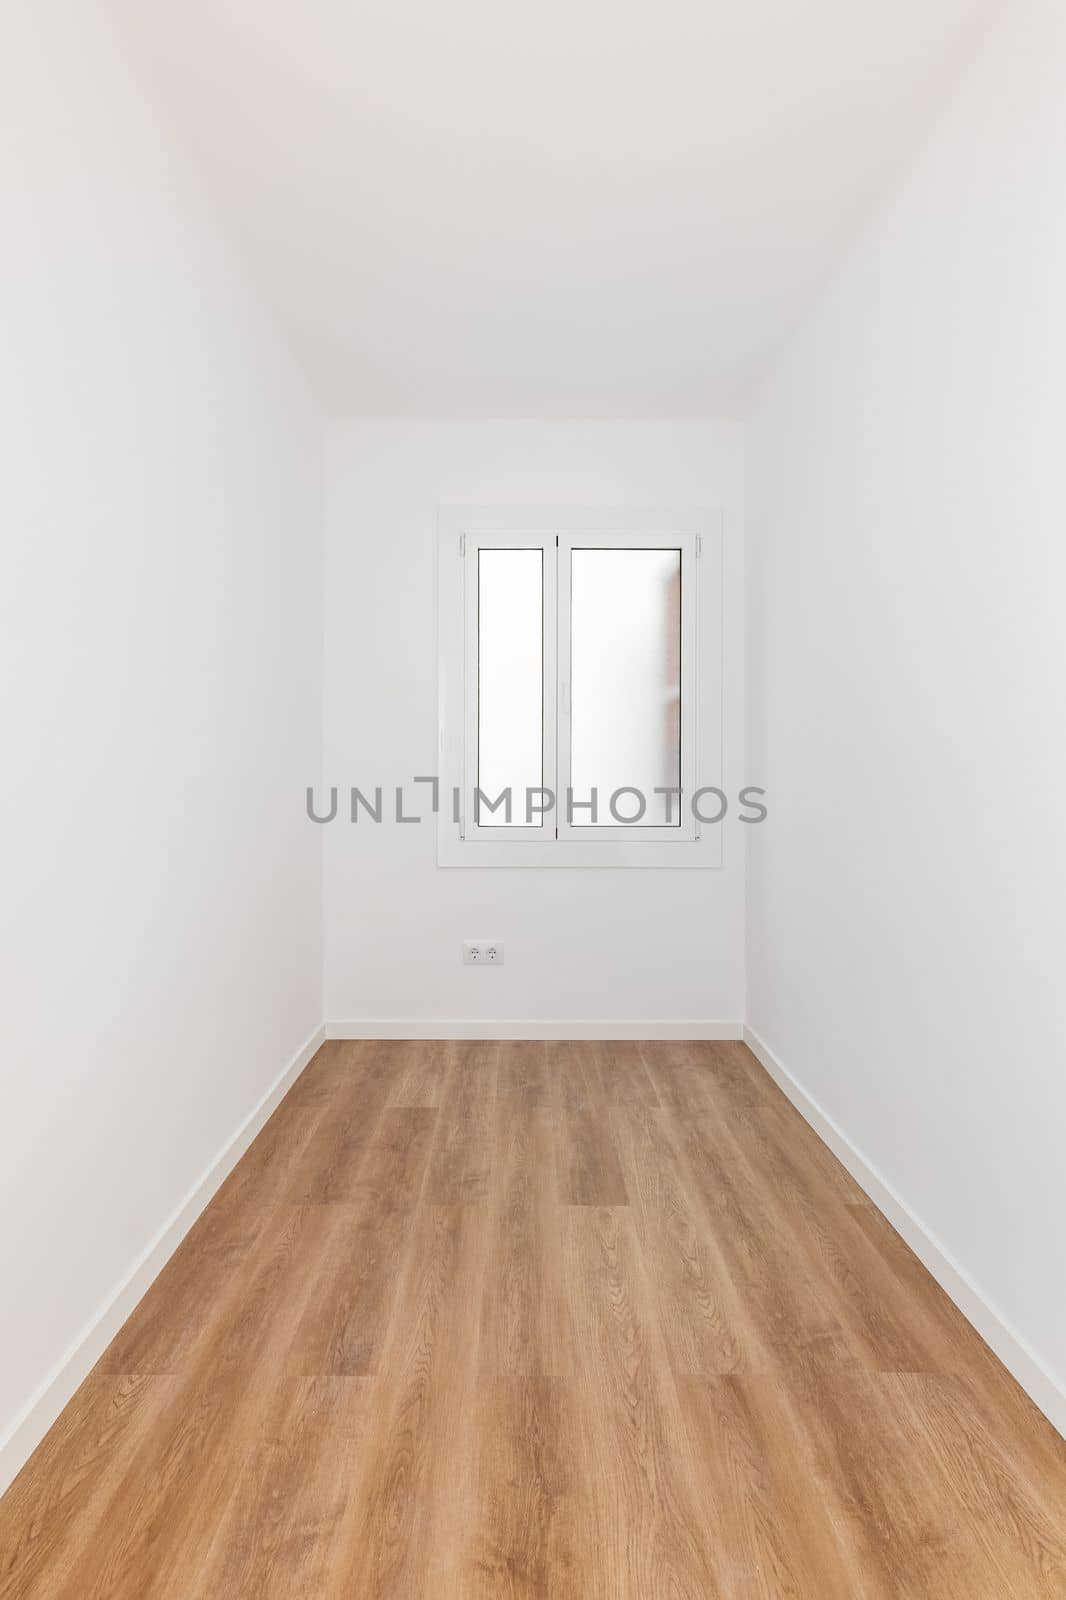 Long narrow rectangular room with white walls and wooden parquet, well lit by daylight from frosted glass window from prying eyes. Several sockets for electrical appliances are built into wall